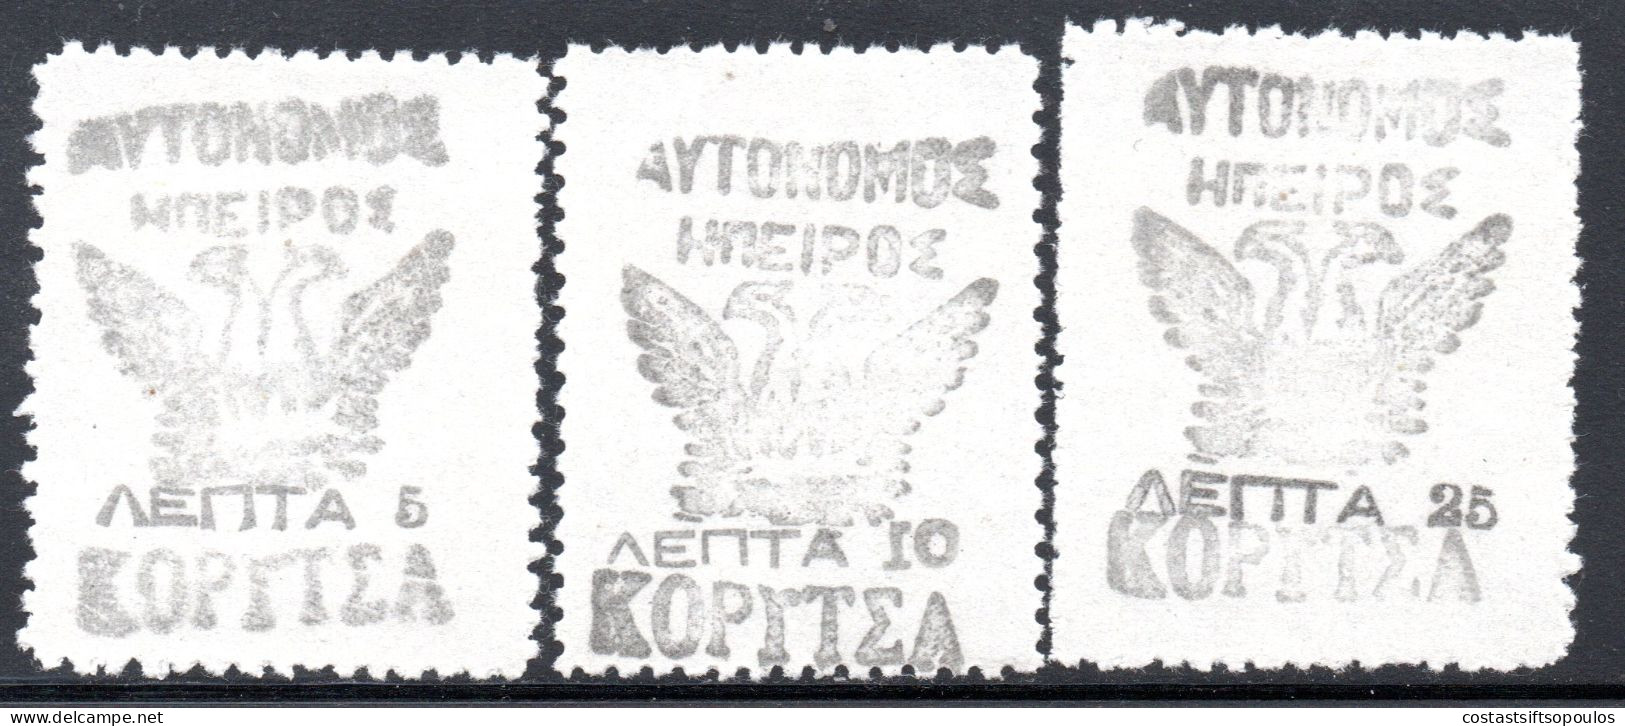 3033.GREECE,ALBANIA,NORTH EPIRUS.1914 KORYTSA UNOFFICIAL ISSUE,WITHOUT GUM AS ISSUED - Nordepirus